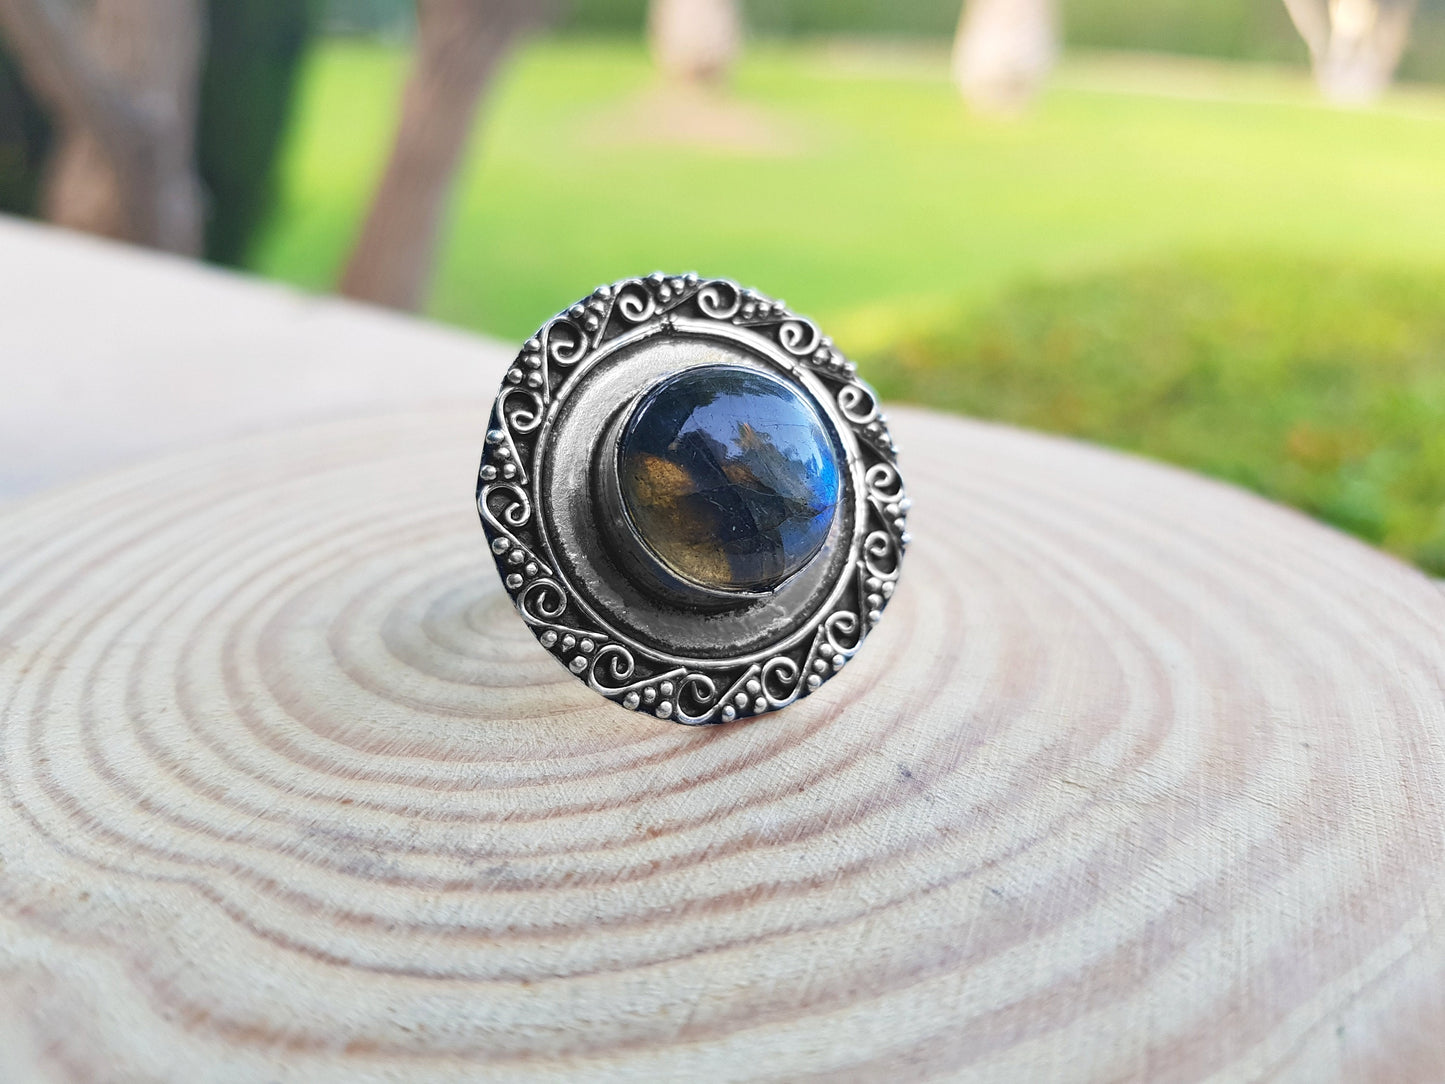 Natural Labradorite Ring Size US7 Sterling Silver Gemstone Ring Boho Rings Statement Ring Unique Gift One Of A Kind Ring